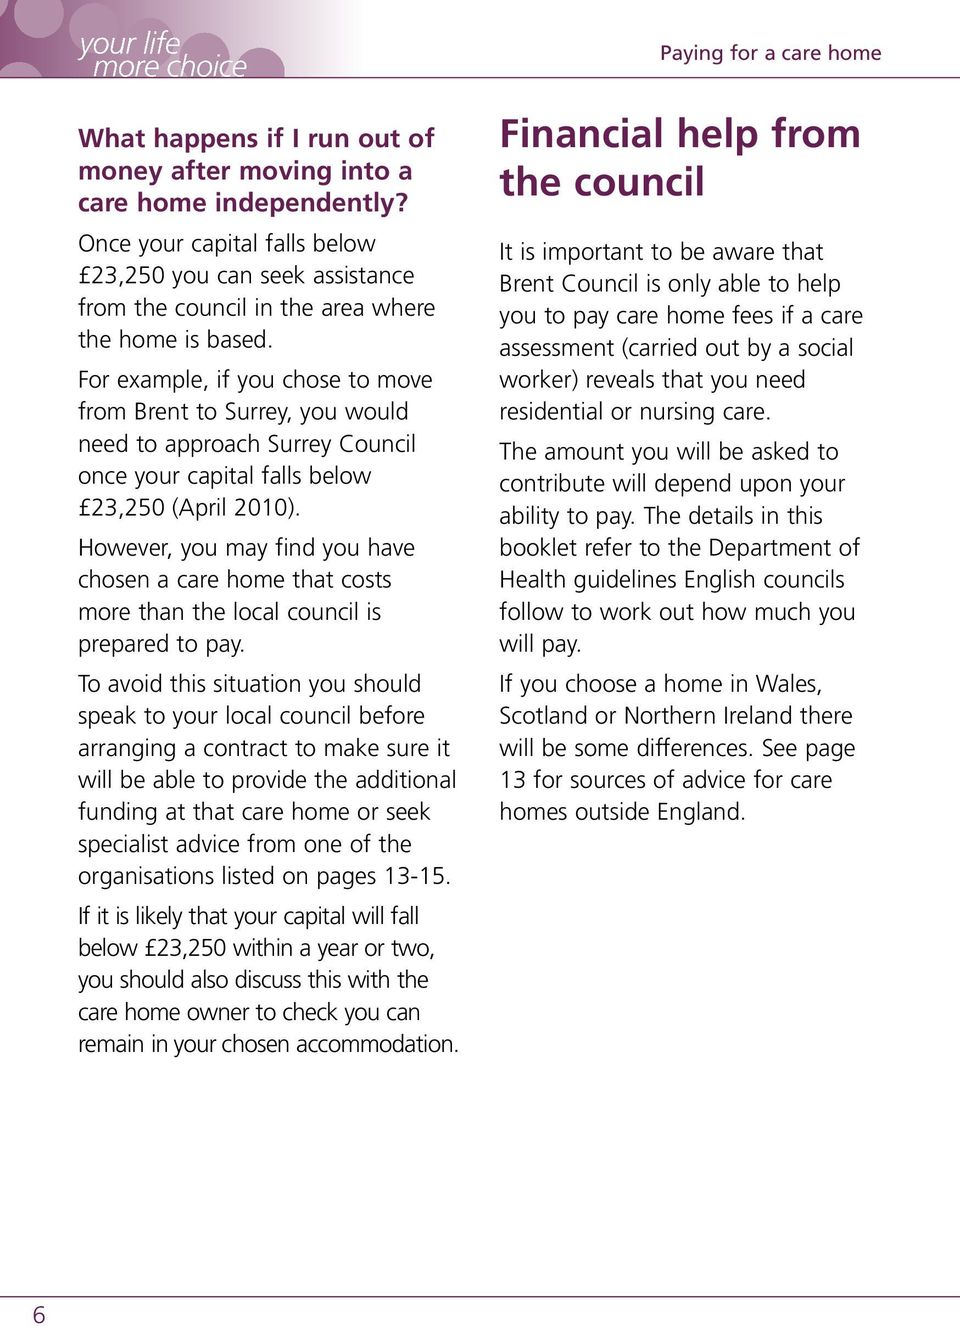 However, you may find you have chosen a care home that costs more than the local council is prepared to pay.